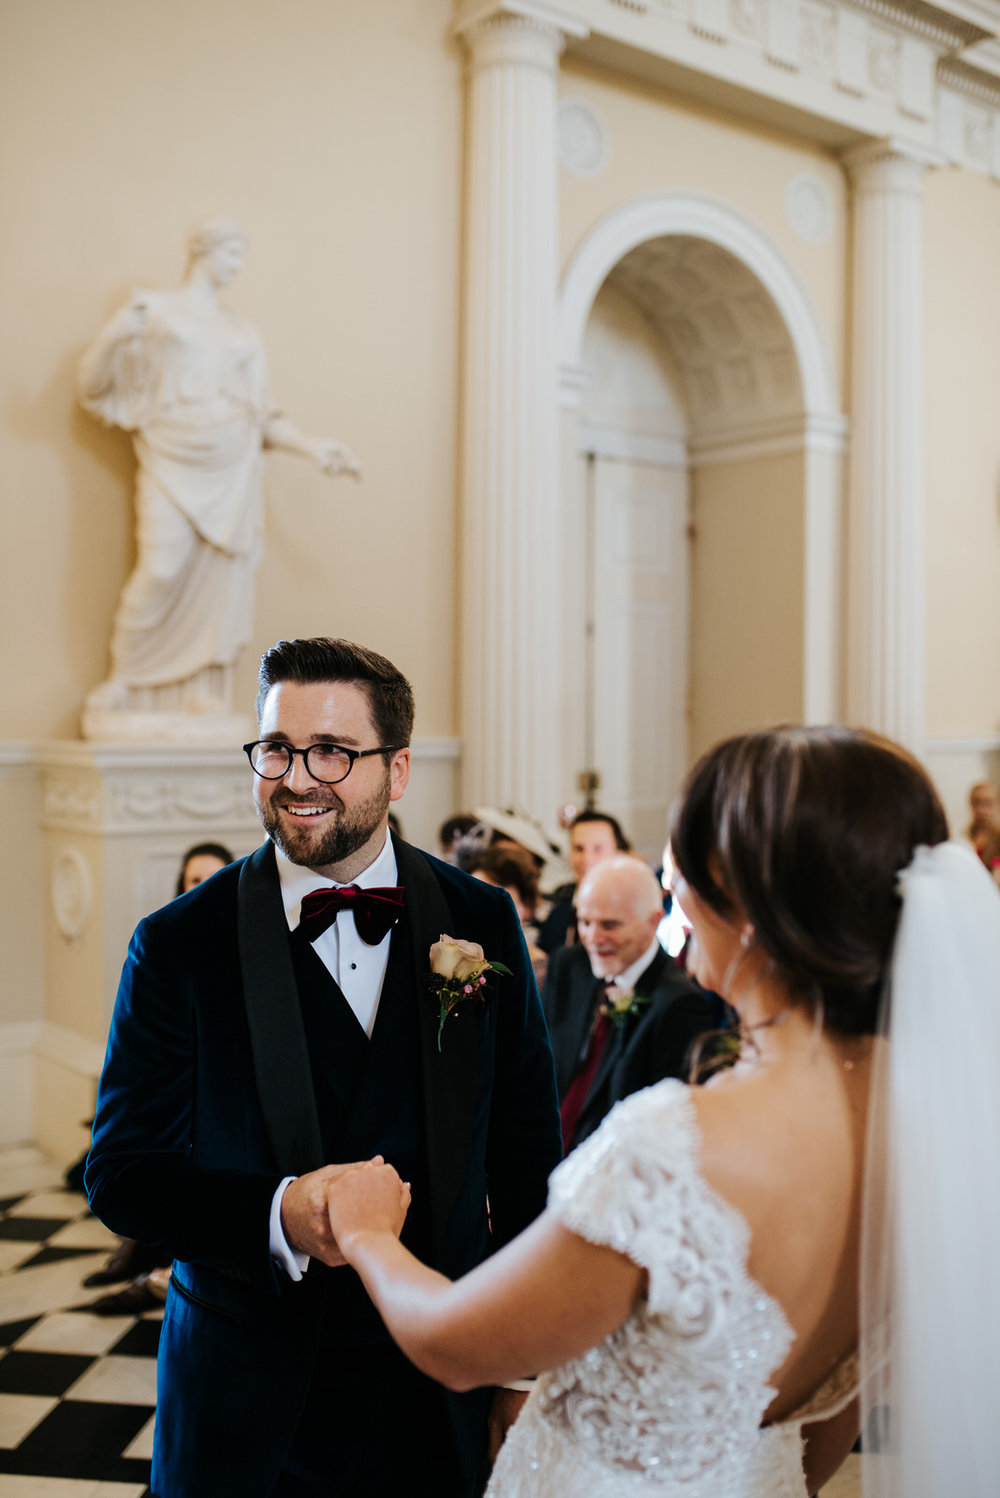 Groom smiles as he holds bride's hand while repeating wedding vows